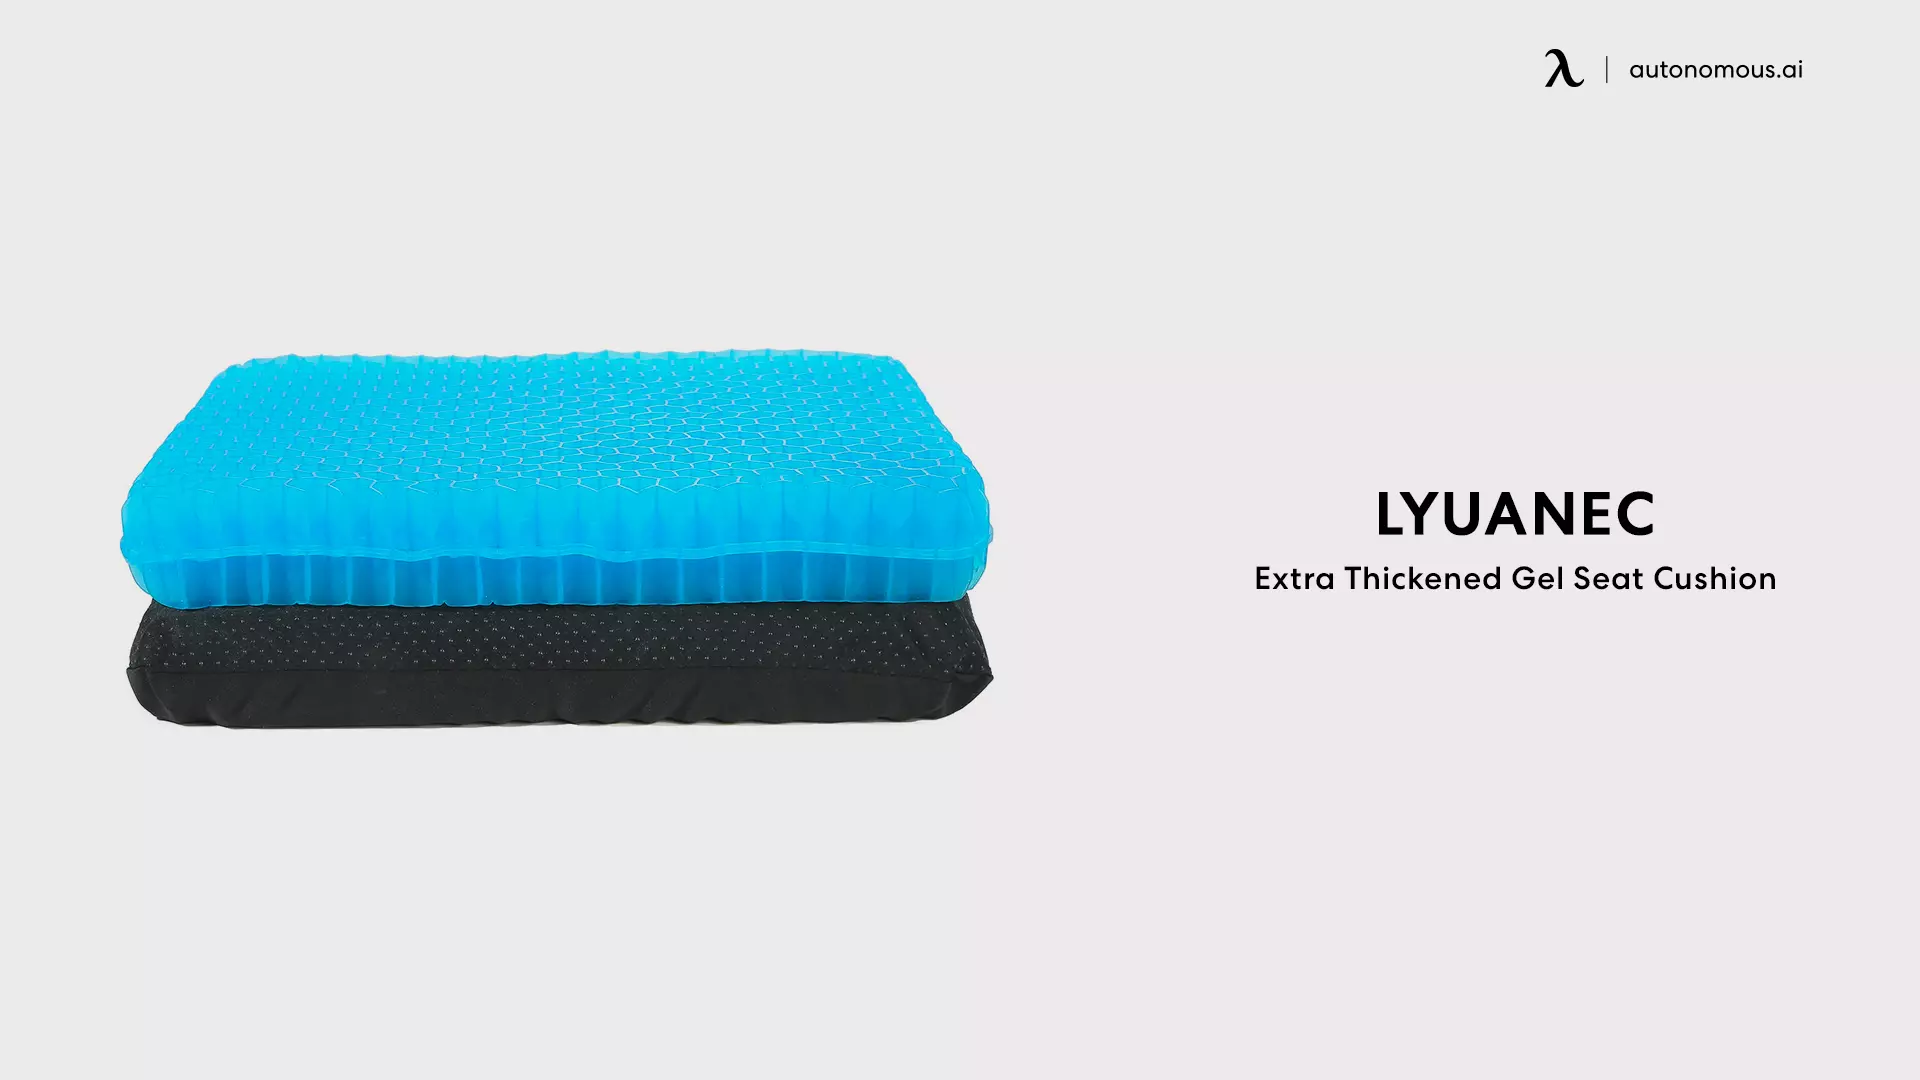 Extra Thickened Gel Seat Cushion